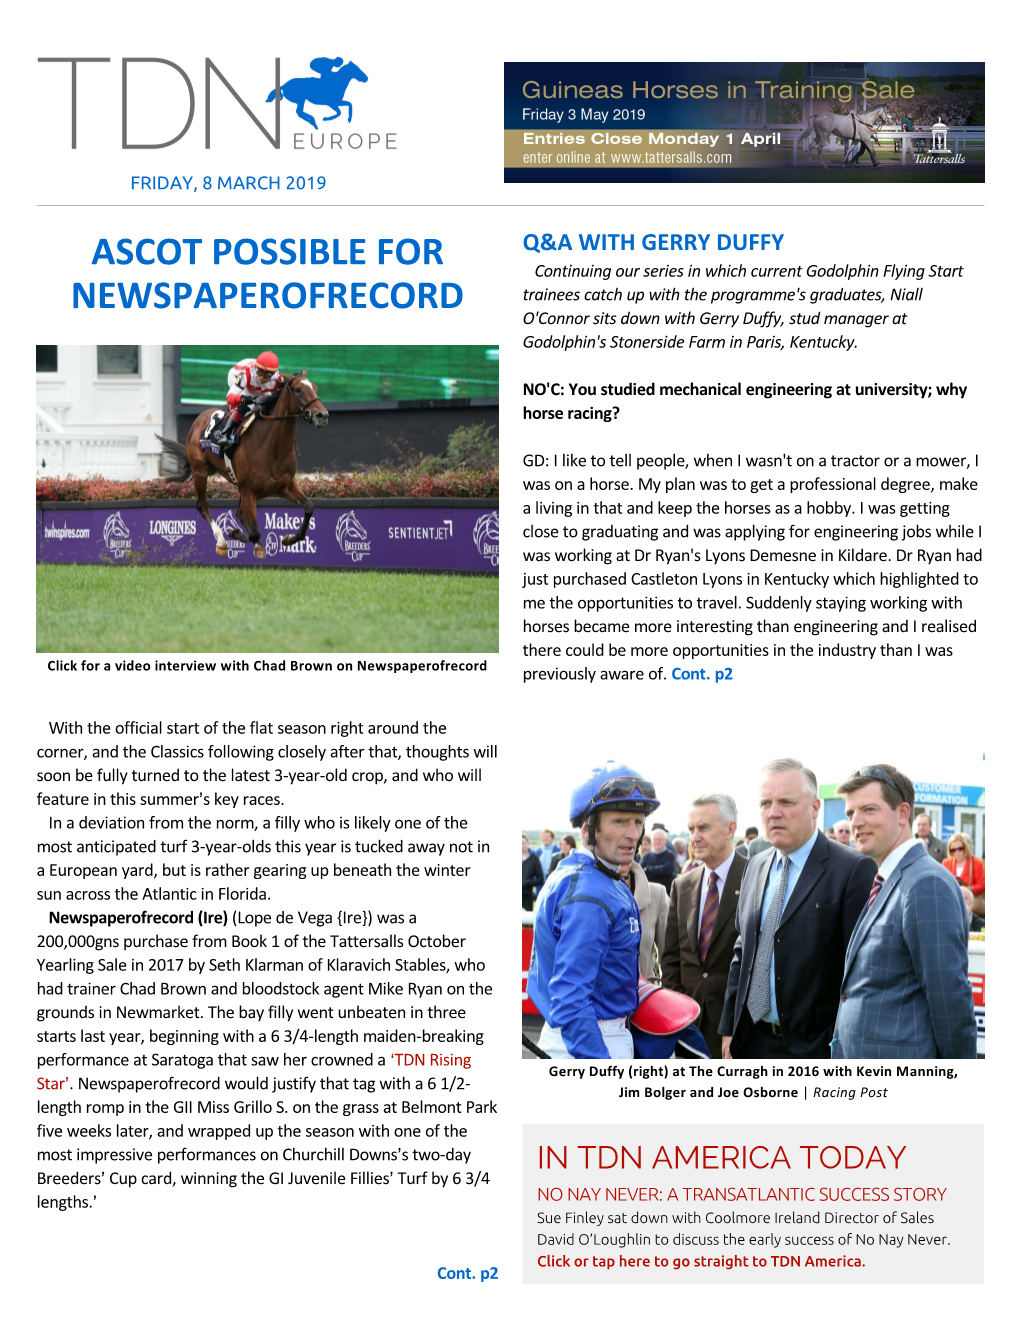 Ascot Possible for Newspaperofrecord Cont